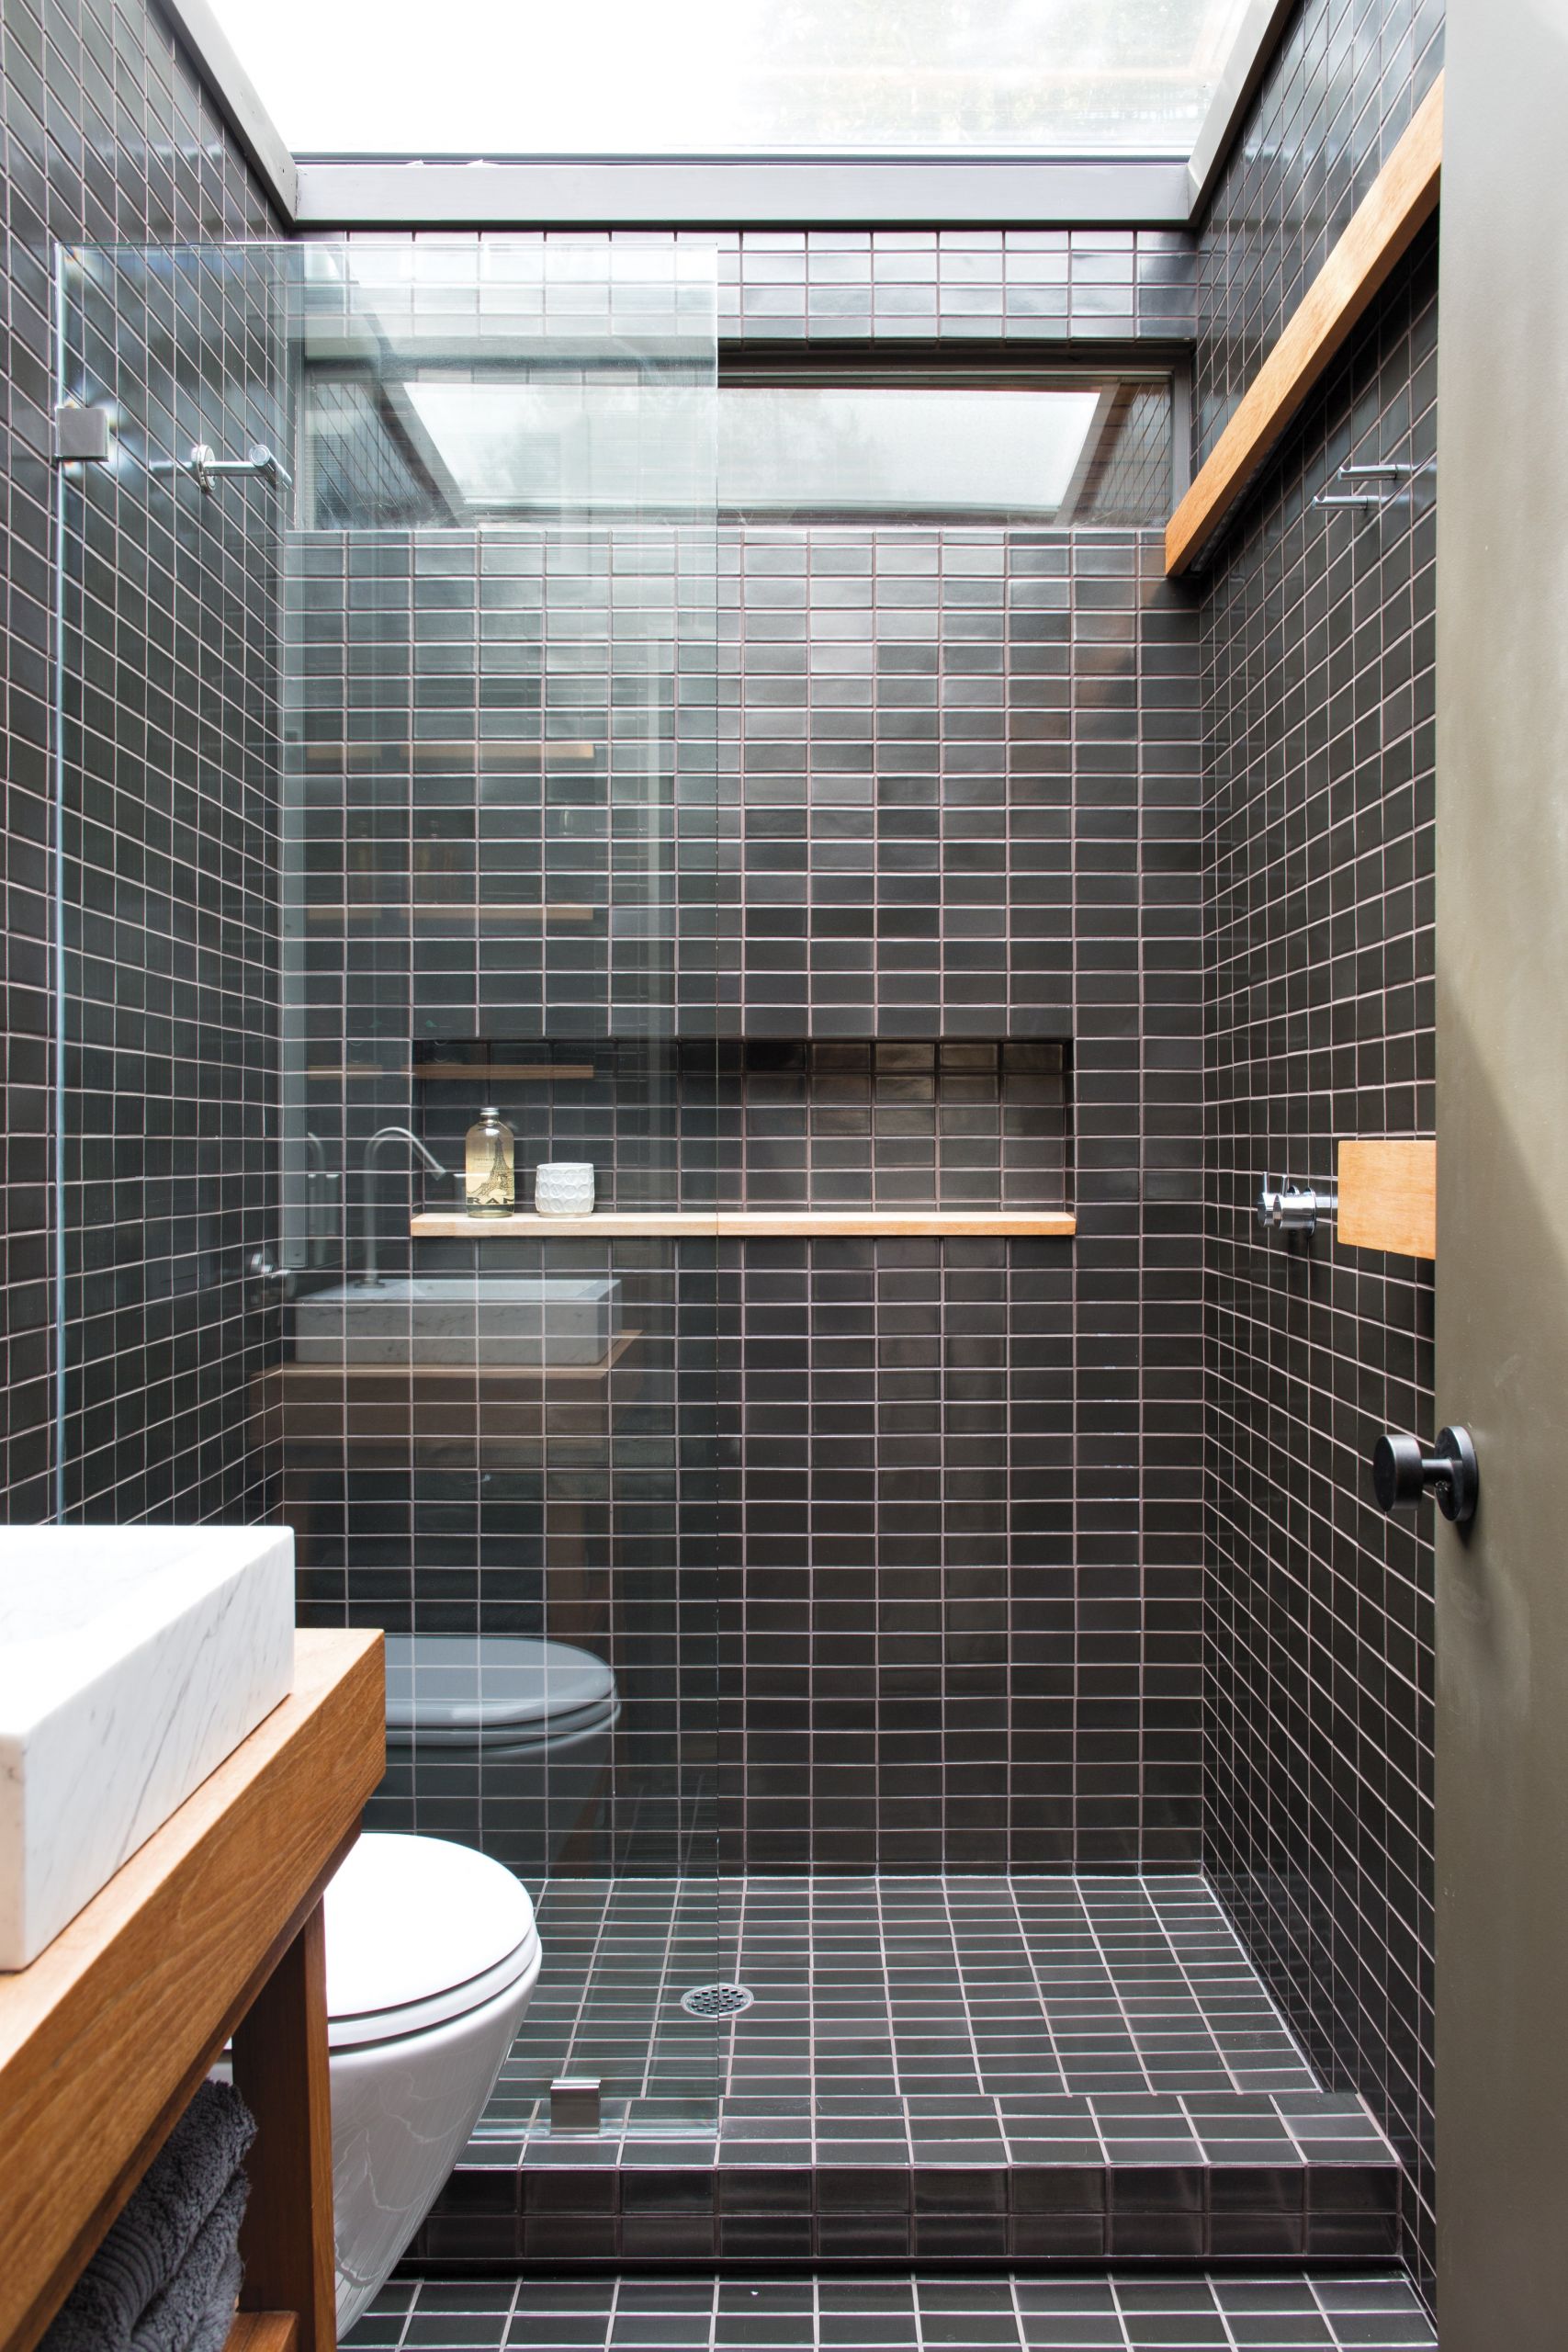 Bathroom Shower Tile Gallery
 How to Create the Bathroom Tile Design of Your Dreams